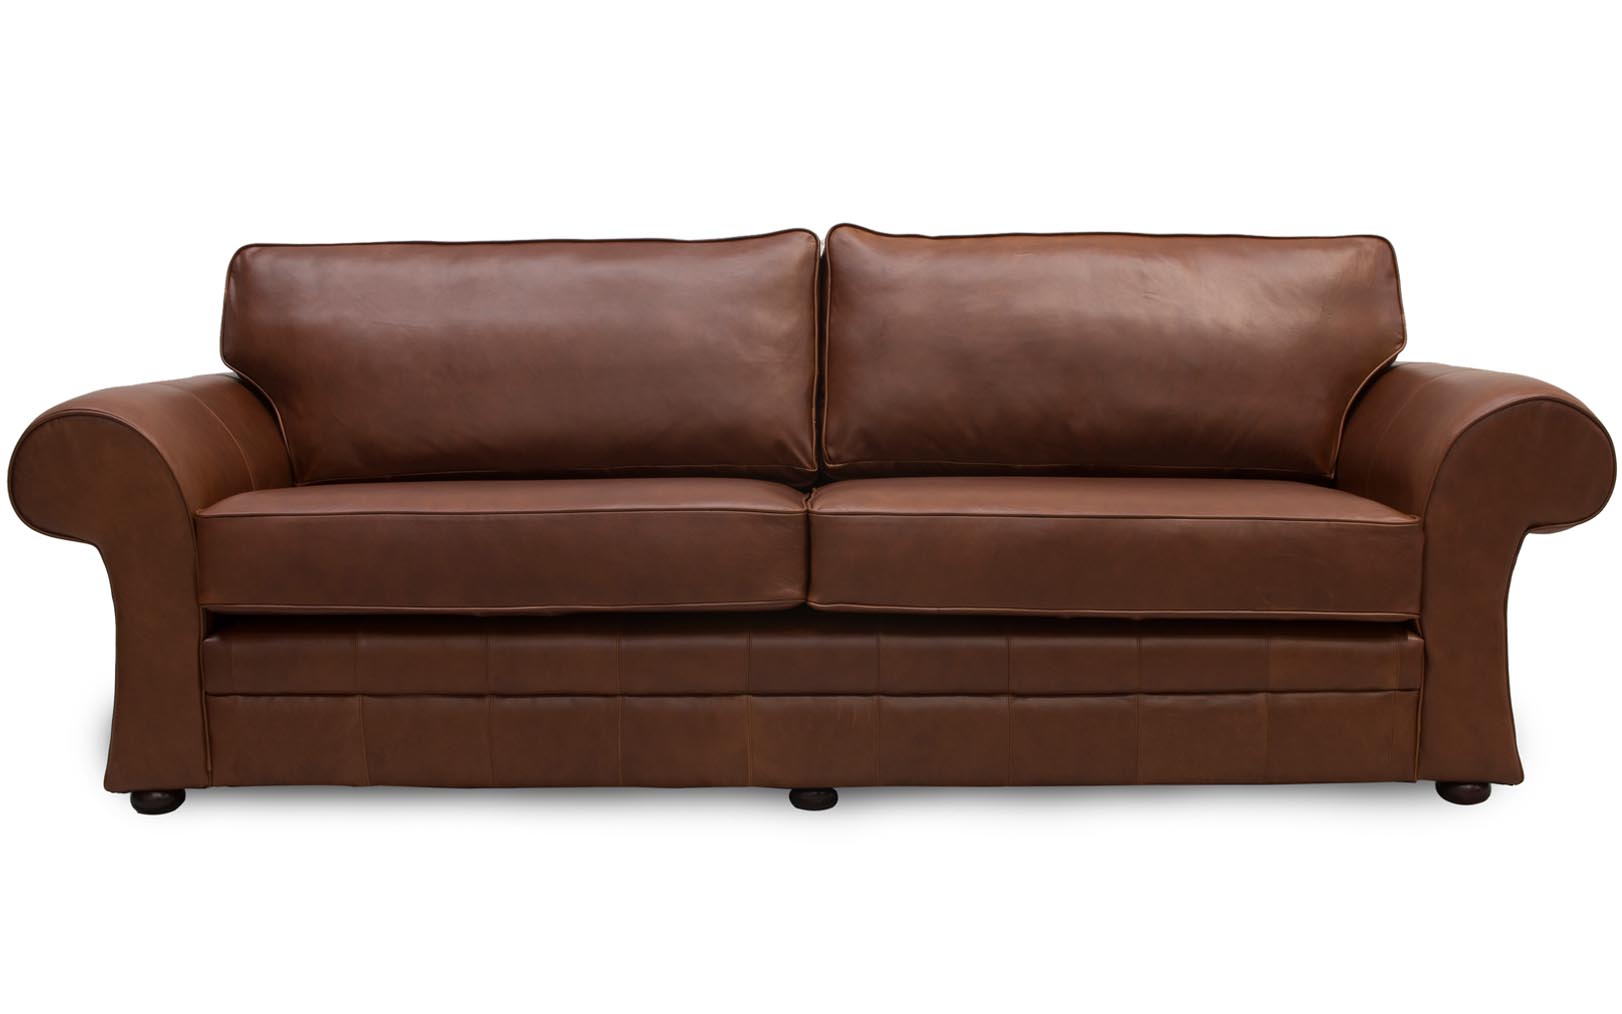 Cavan Scroll Arm Leather Sofa Made In Manchester By The Leather